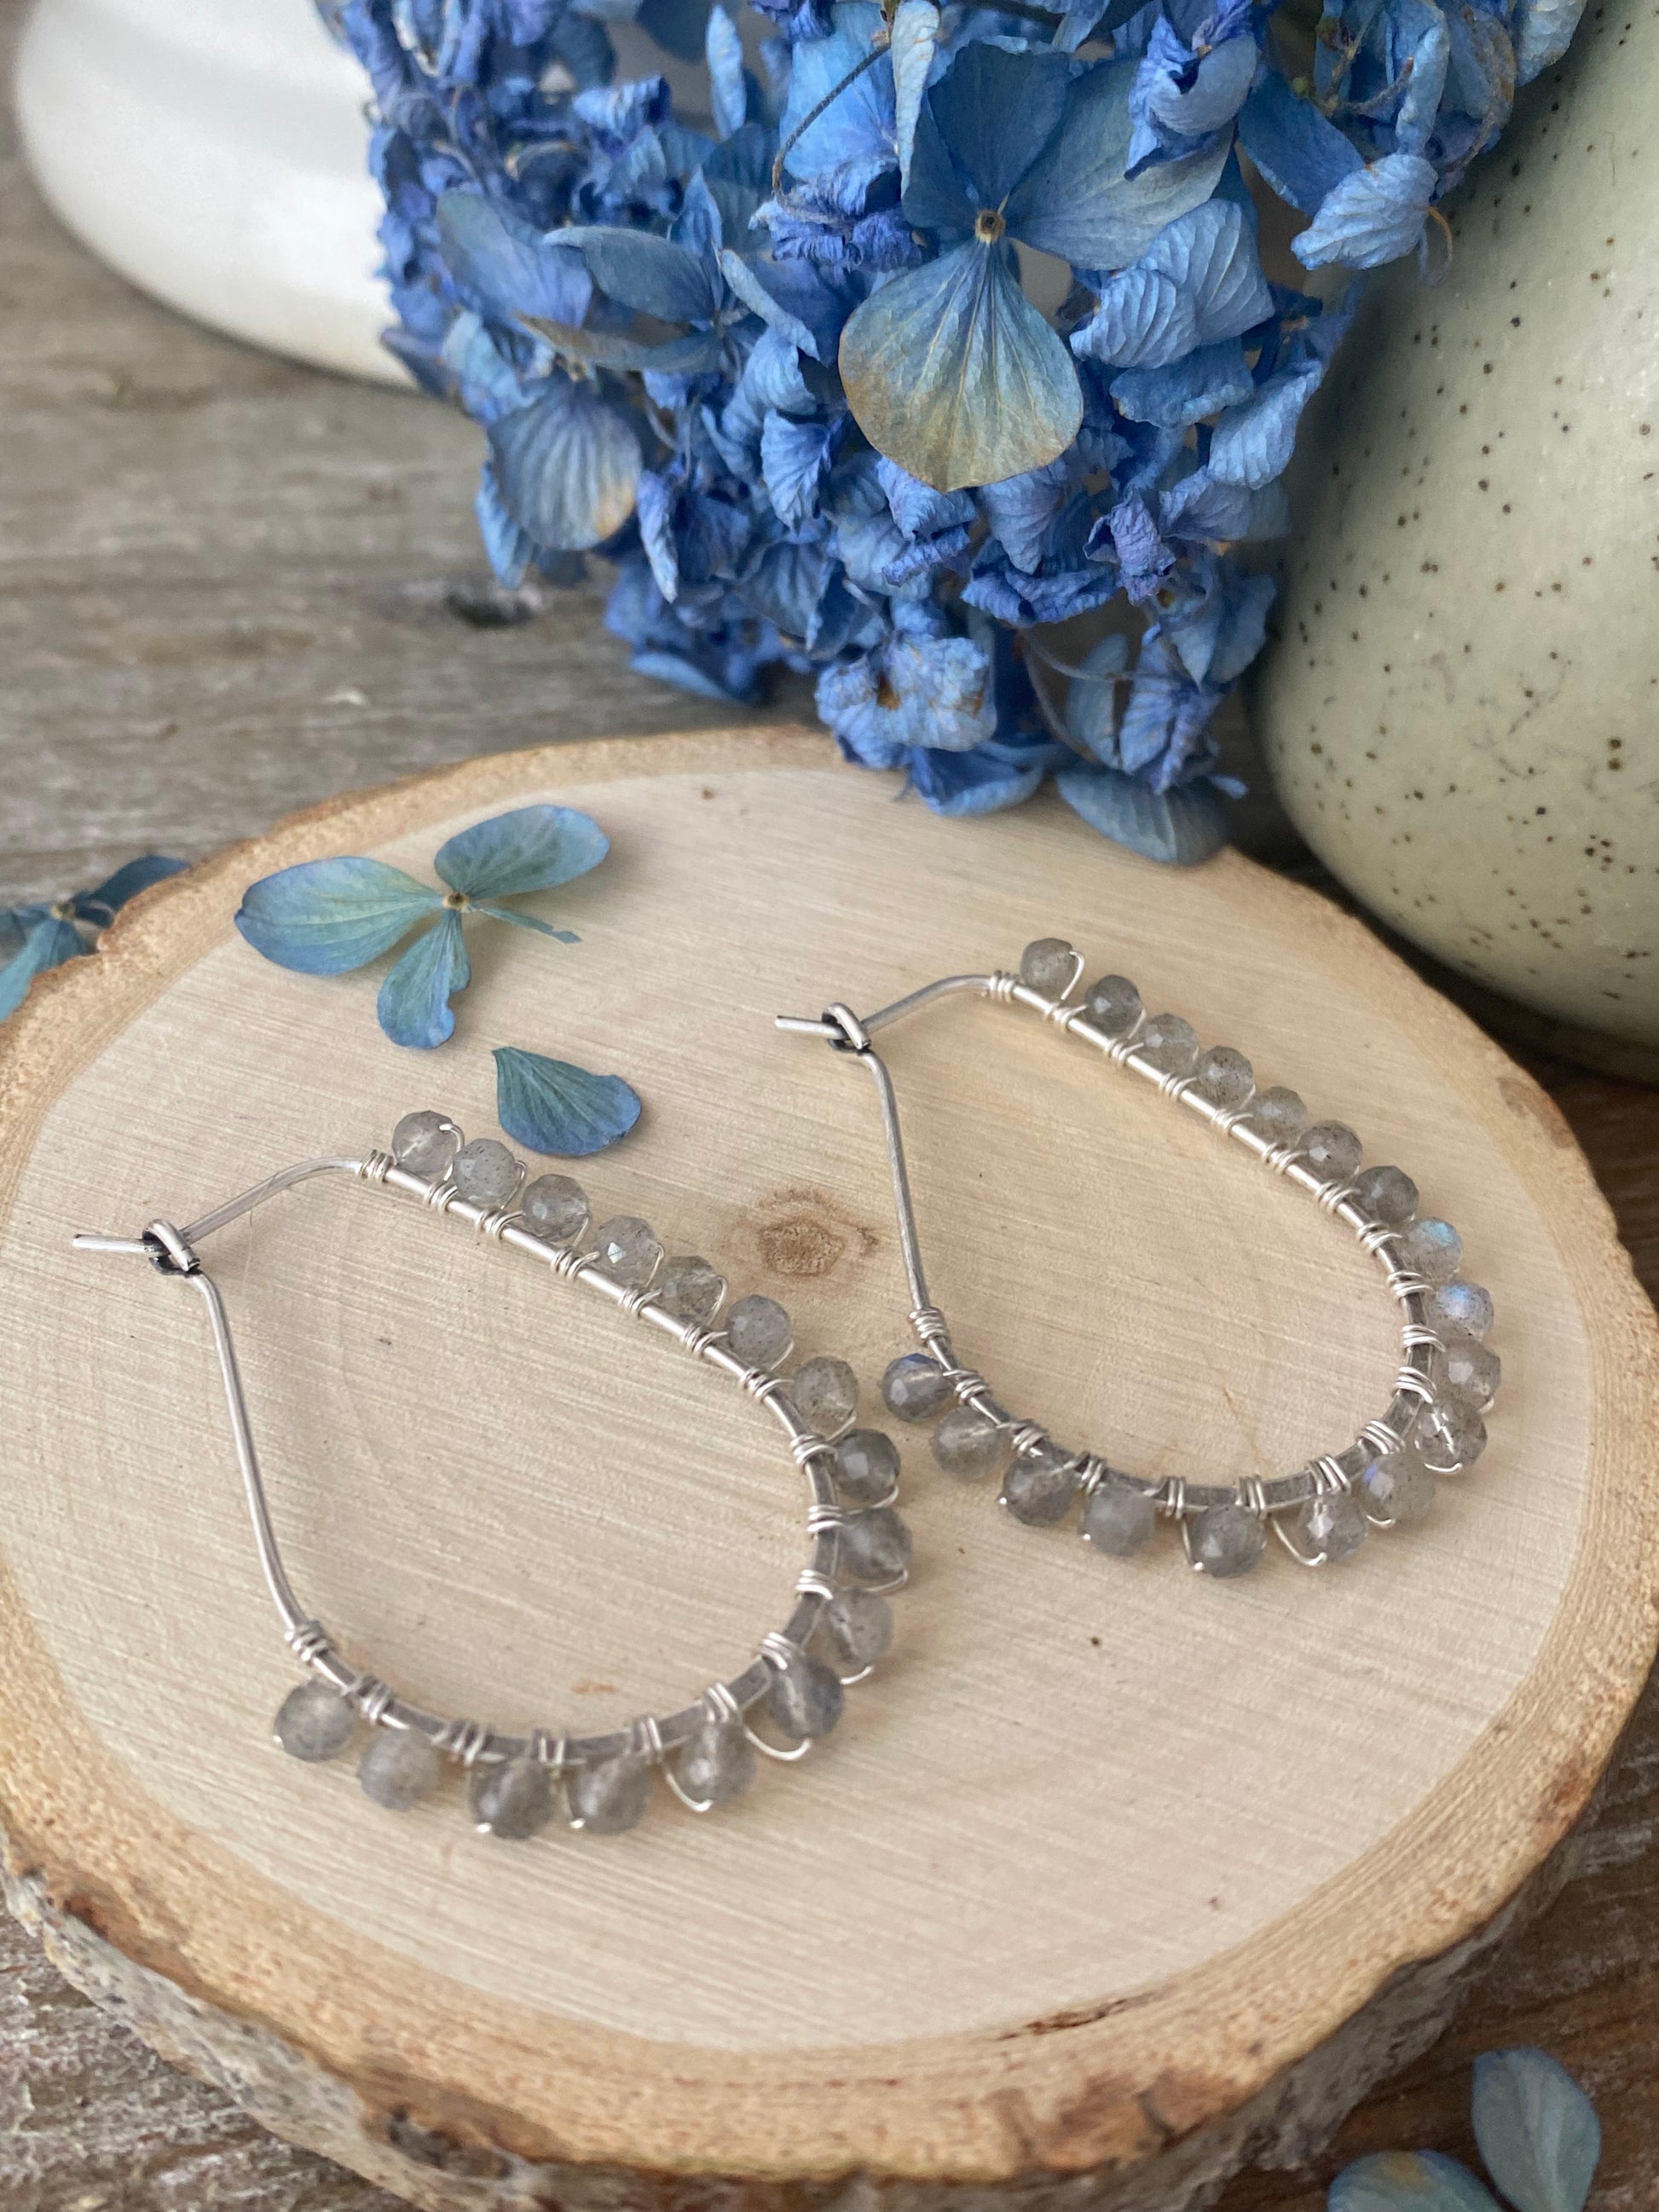 Labradorite stone, wire wrapped silver hoop earrings, jewelry - Andria Bieber Designs 